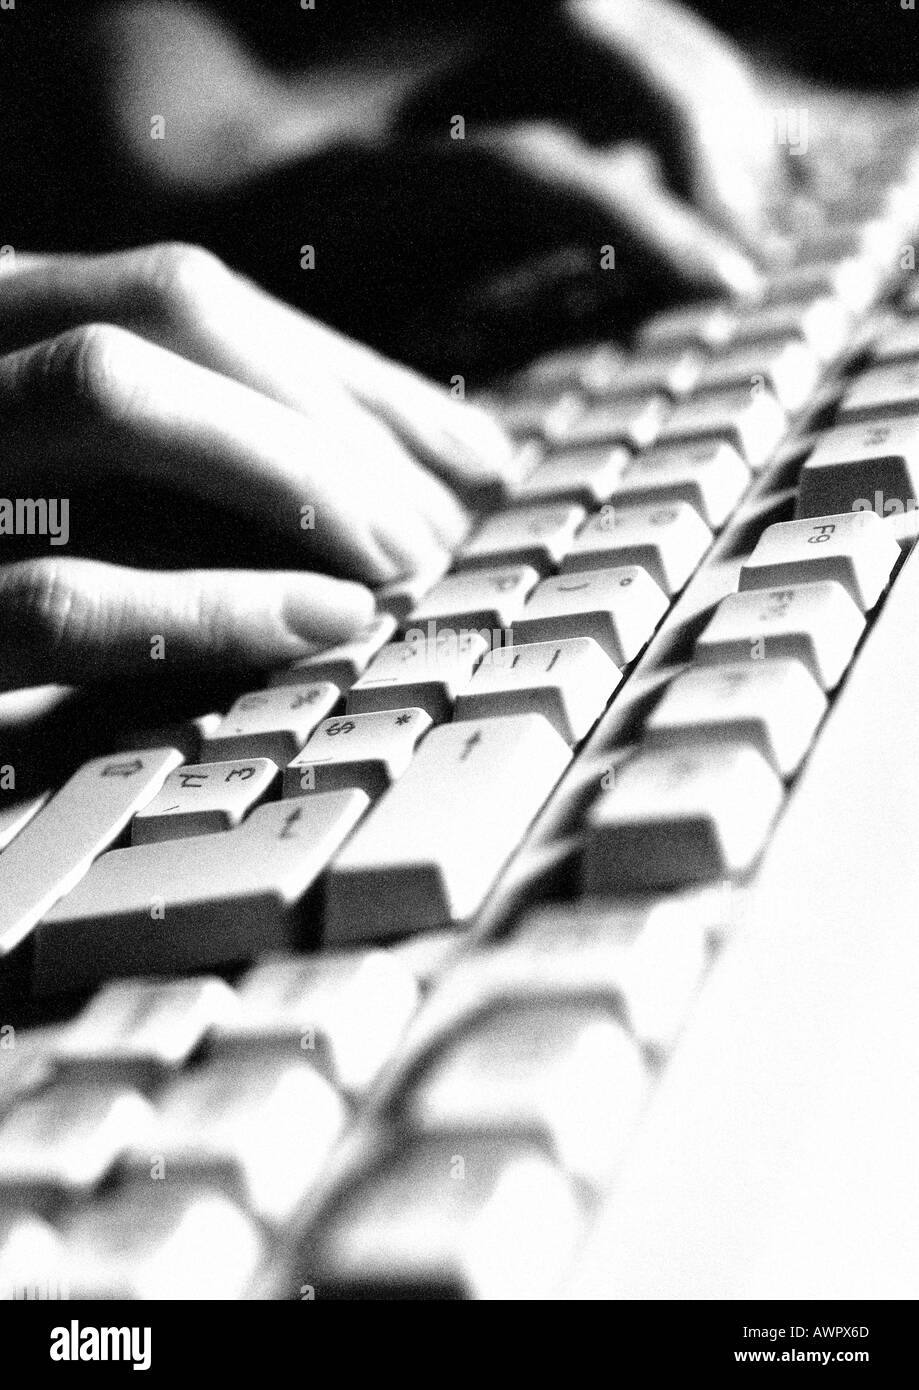 Hands on computer keyboard, close-up Stock Photo